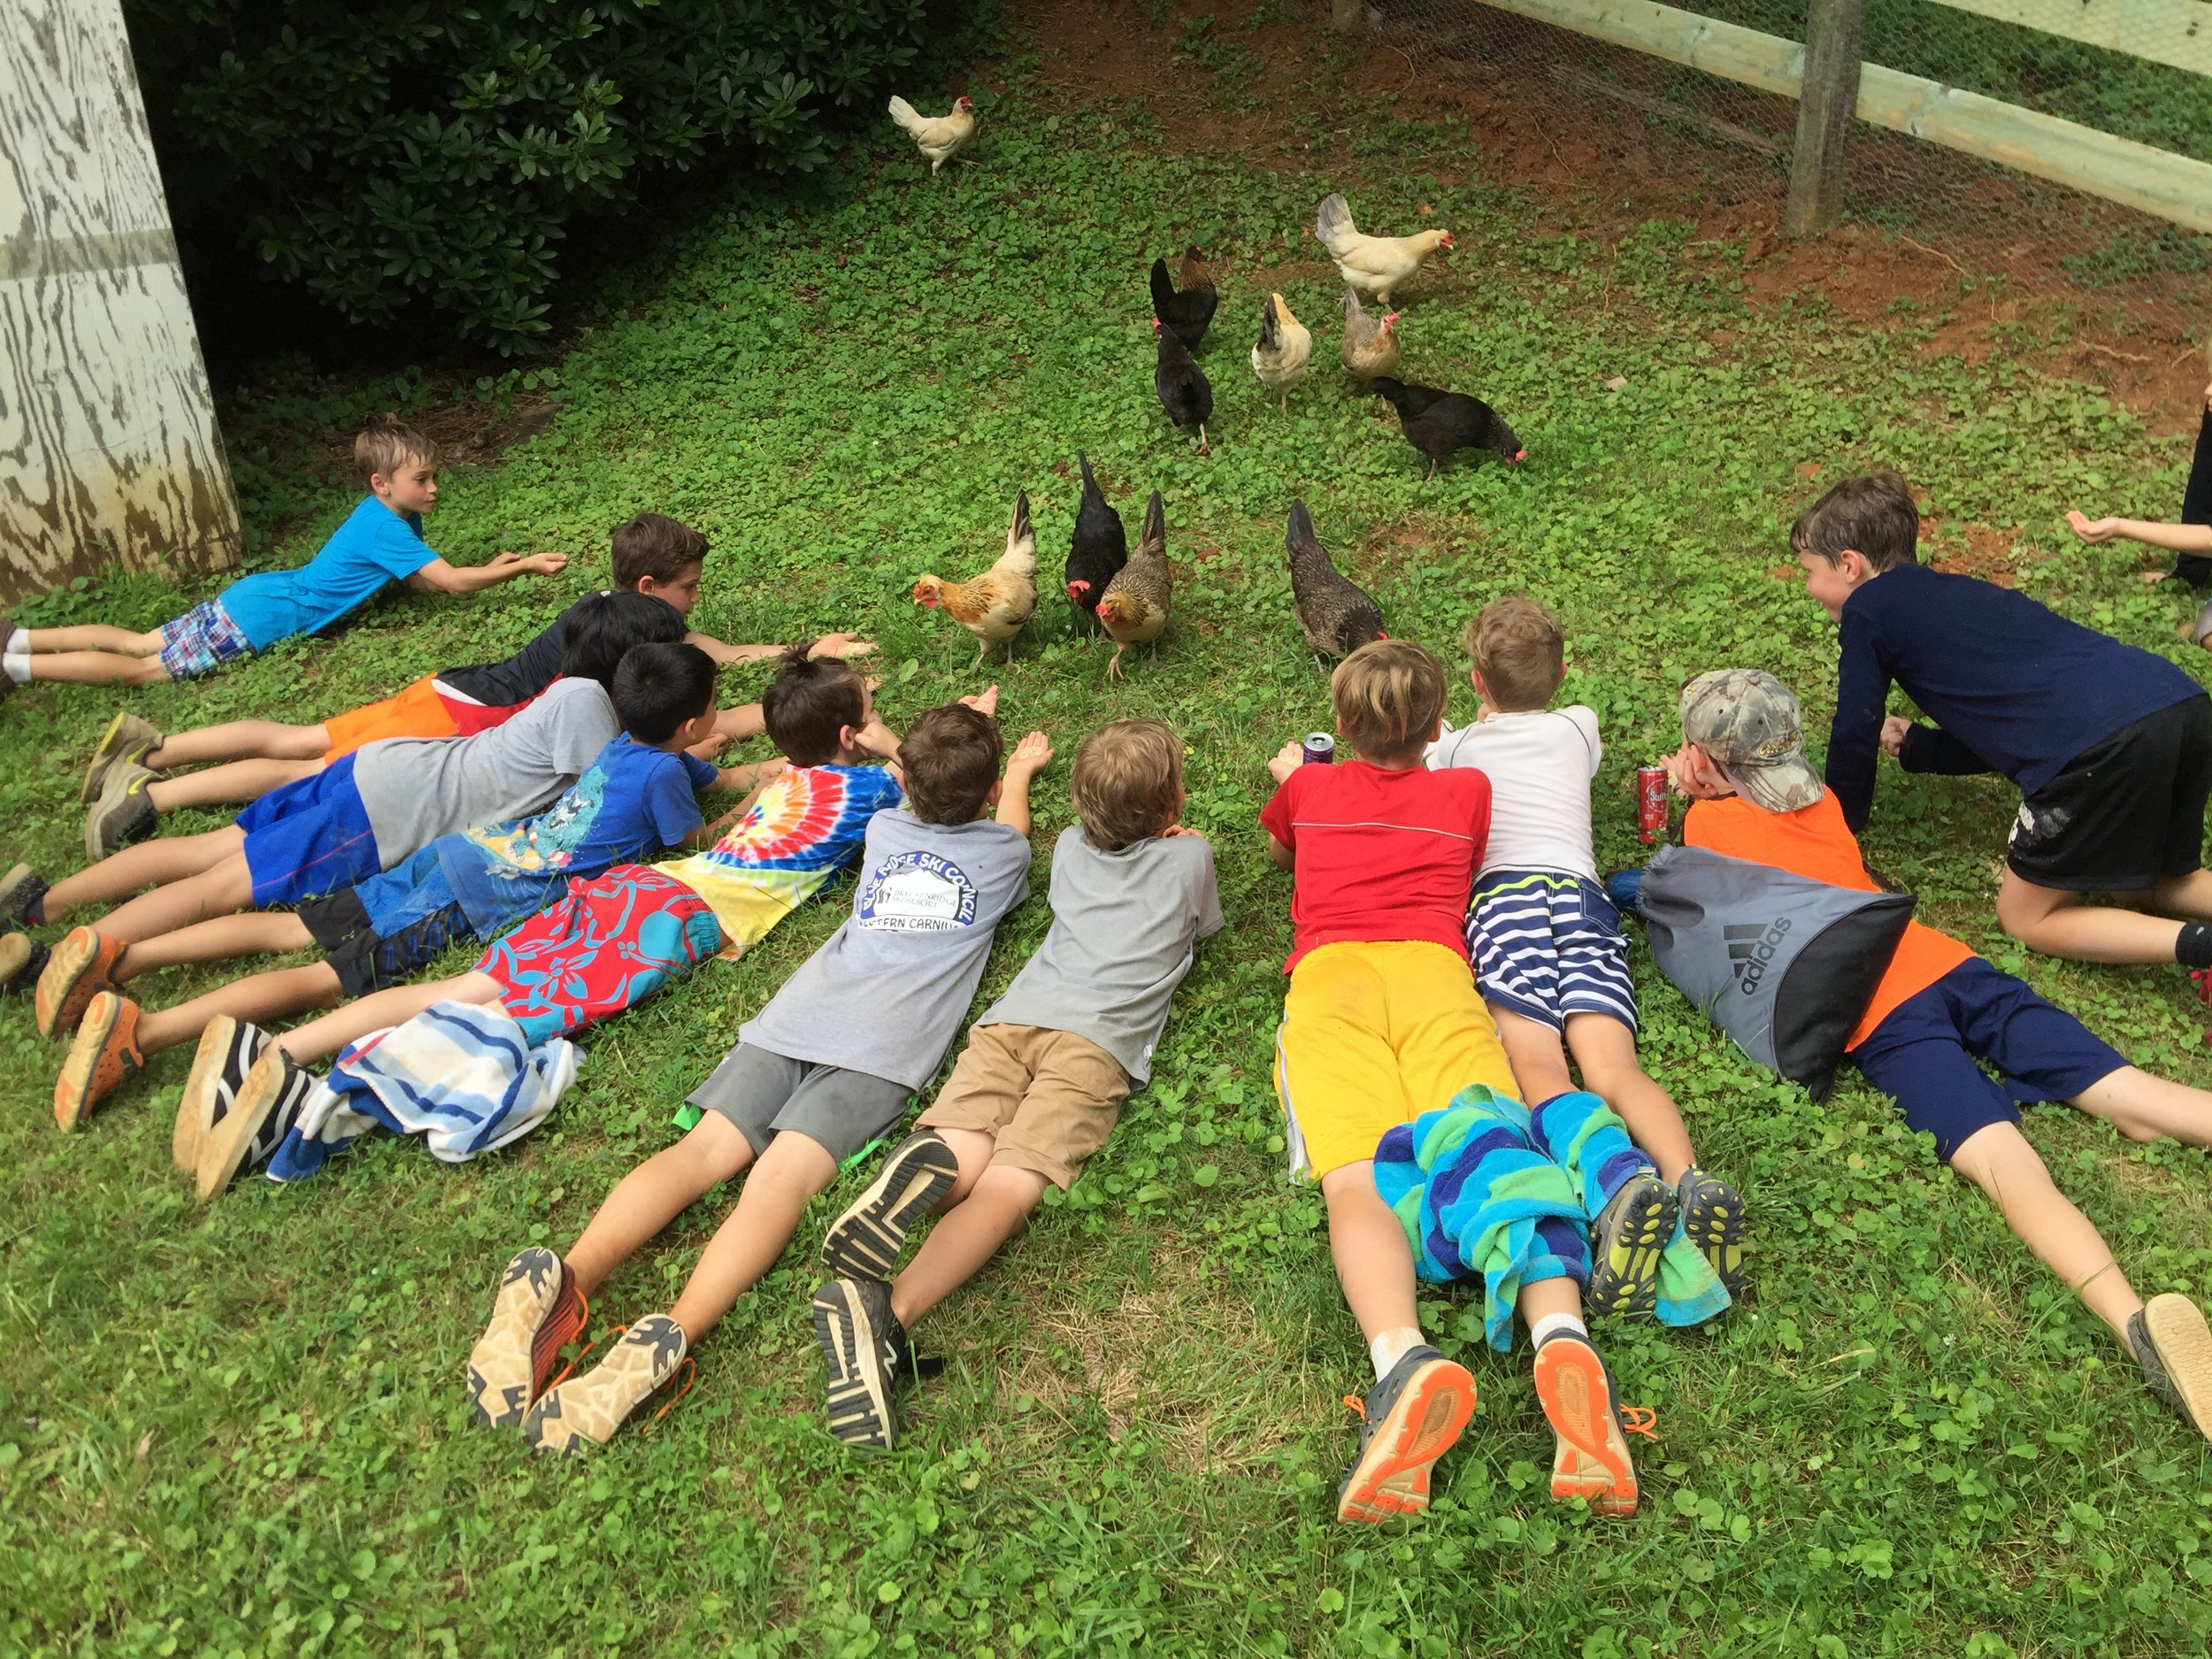 campers and chickens.JPG